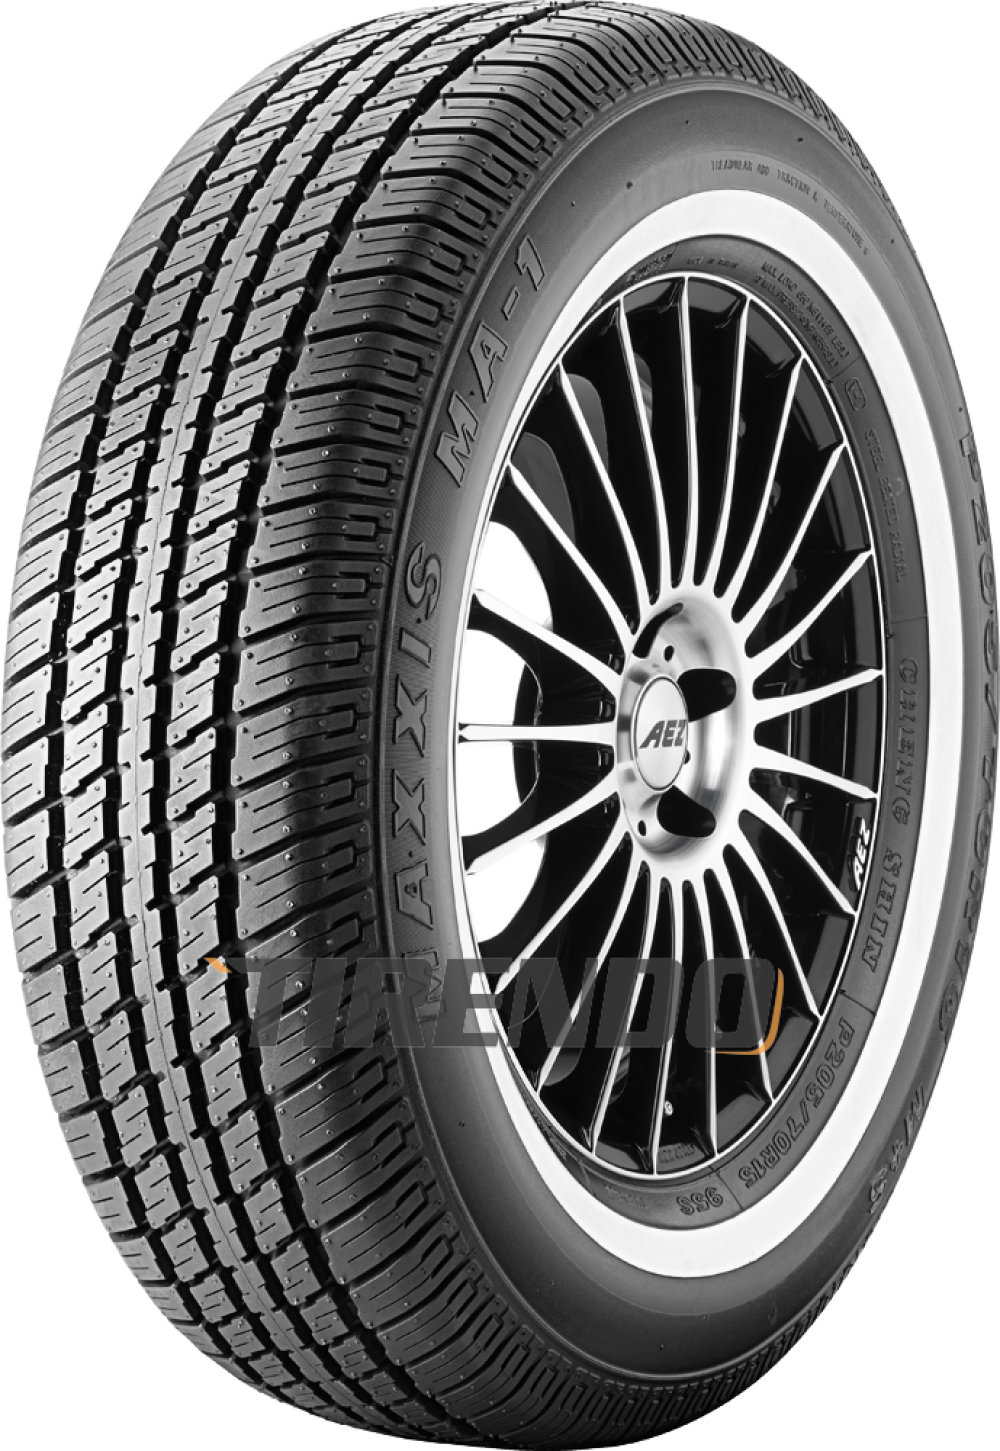 Maxxis MA 1 ( 205/70 R15 95S WSW 20mm ) von Maxxis